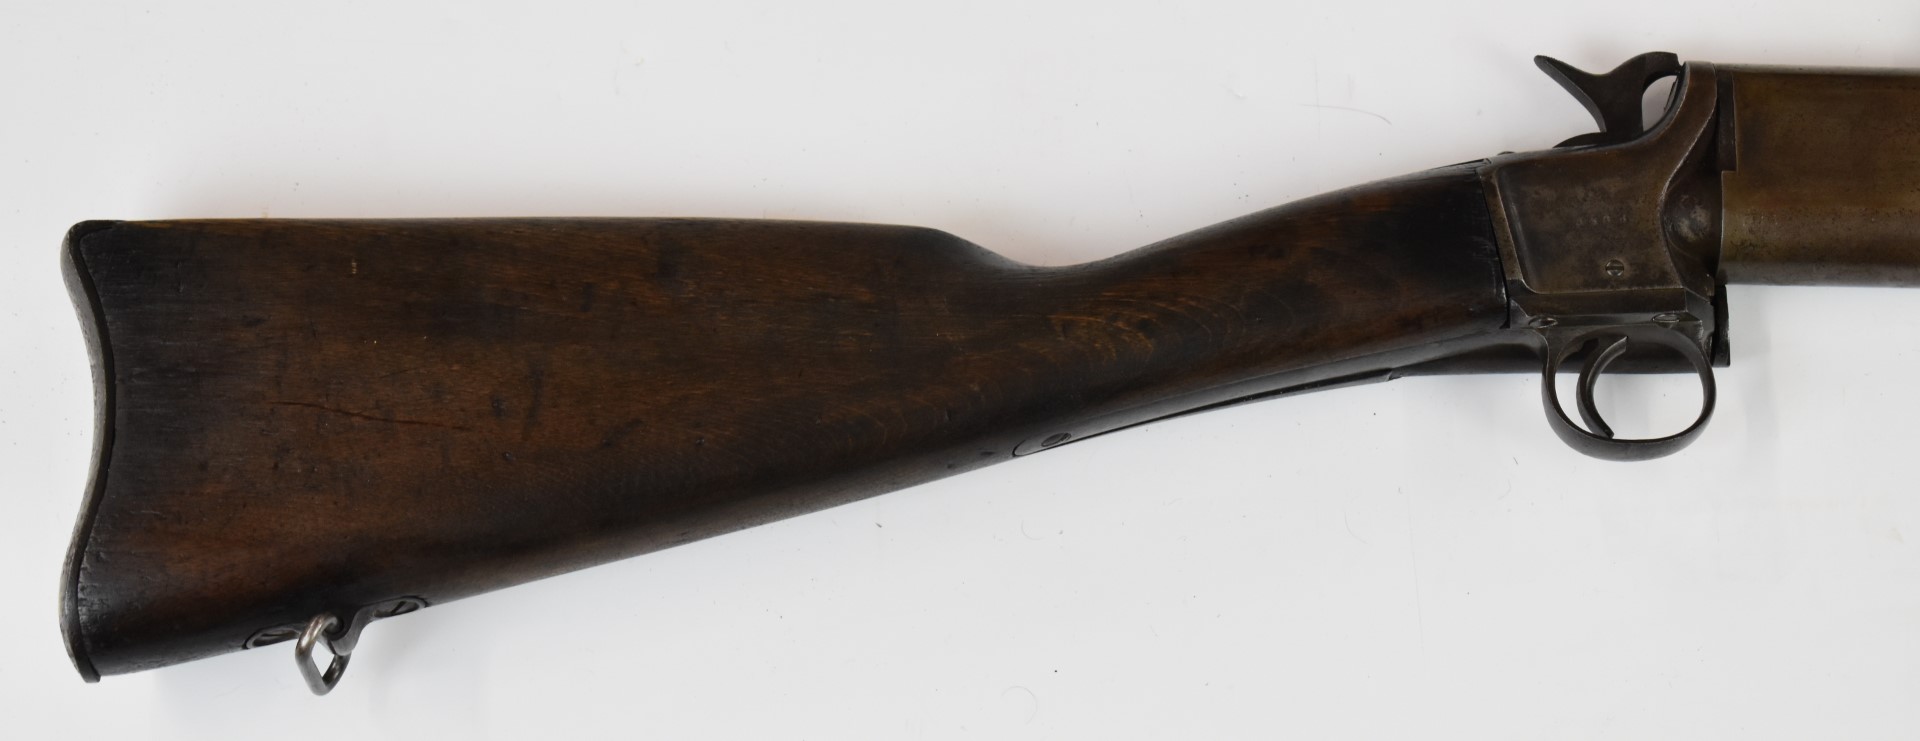 Meriden Manufacturing Co for Charles Parker of Triplett & Scott .50 twist-action repeating carbine - Image 3 of 7